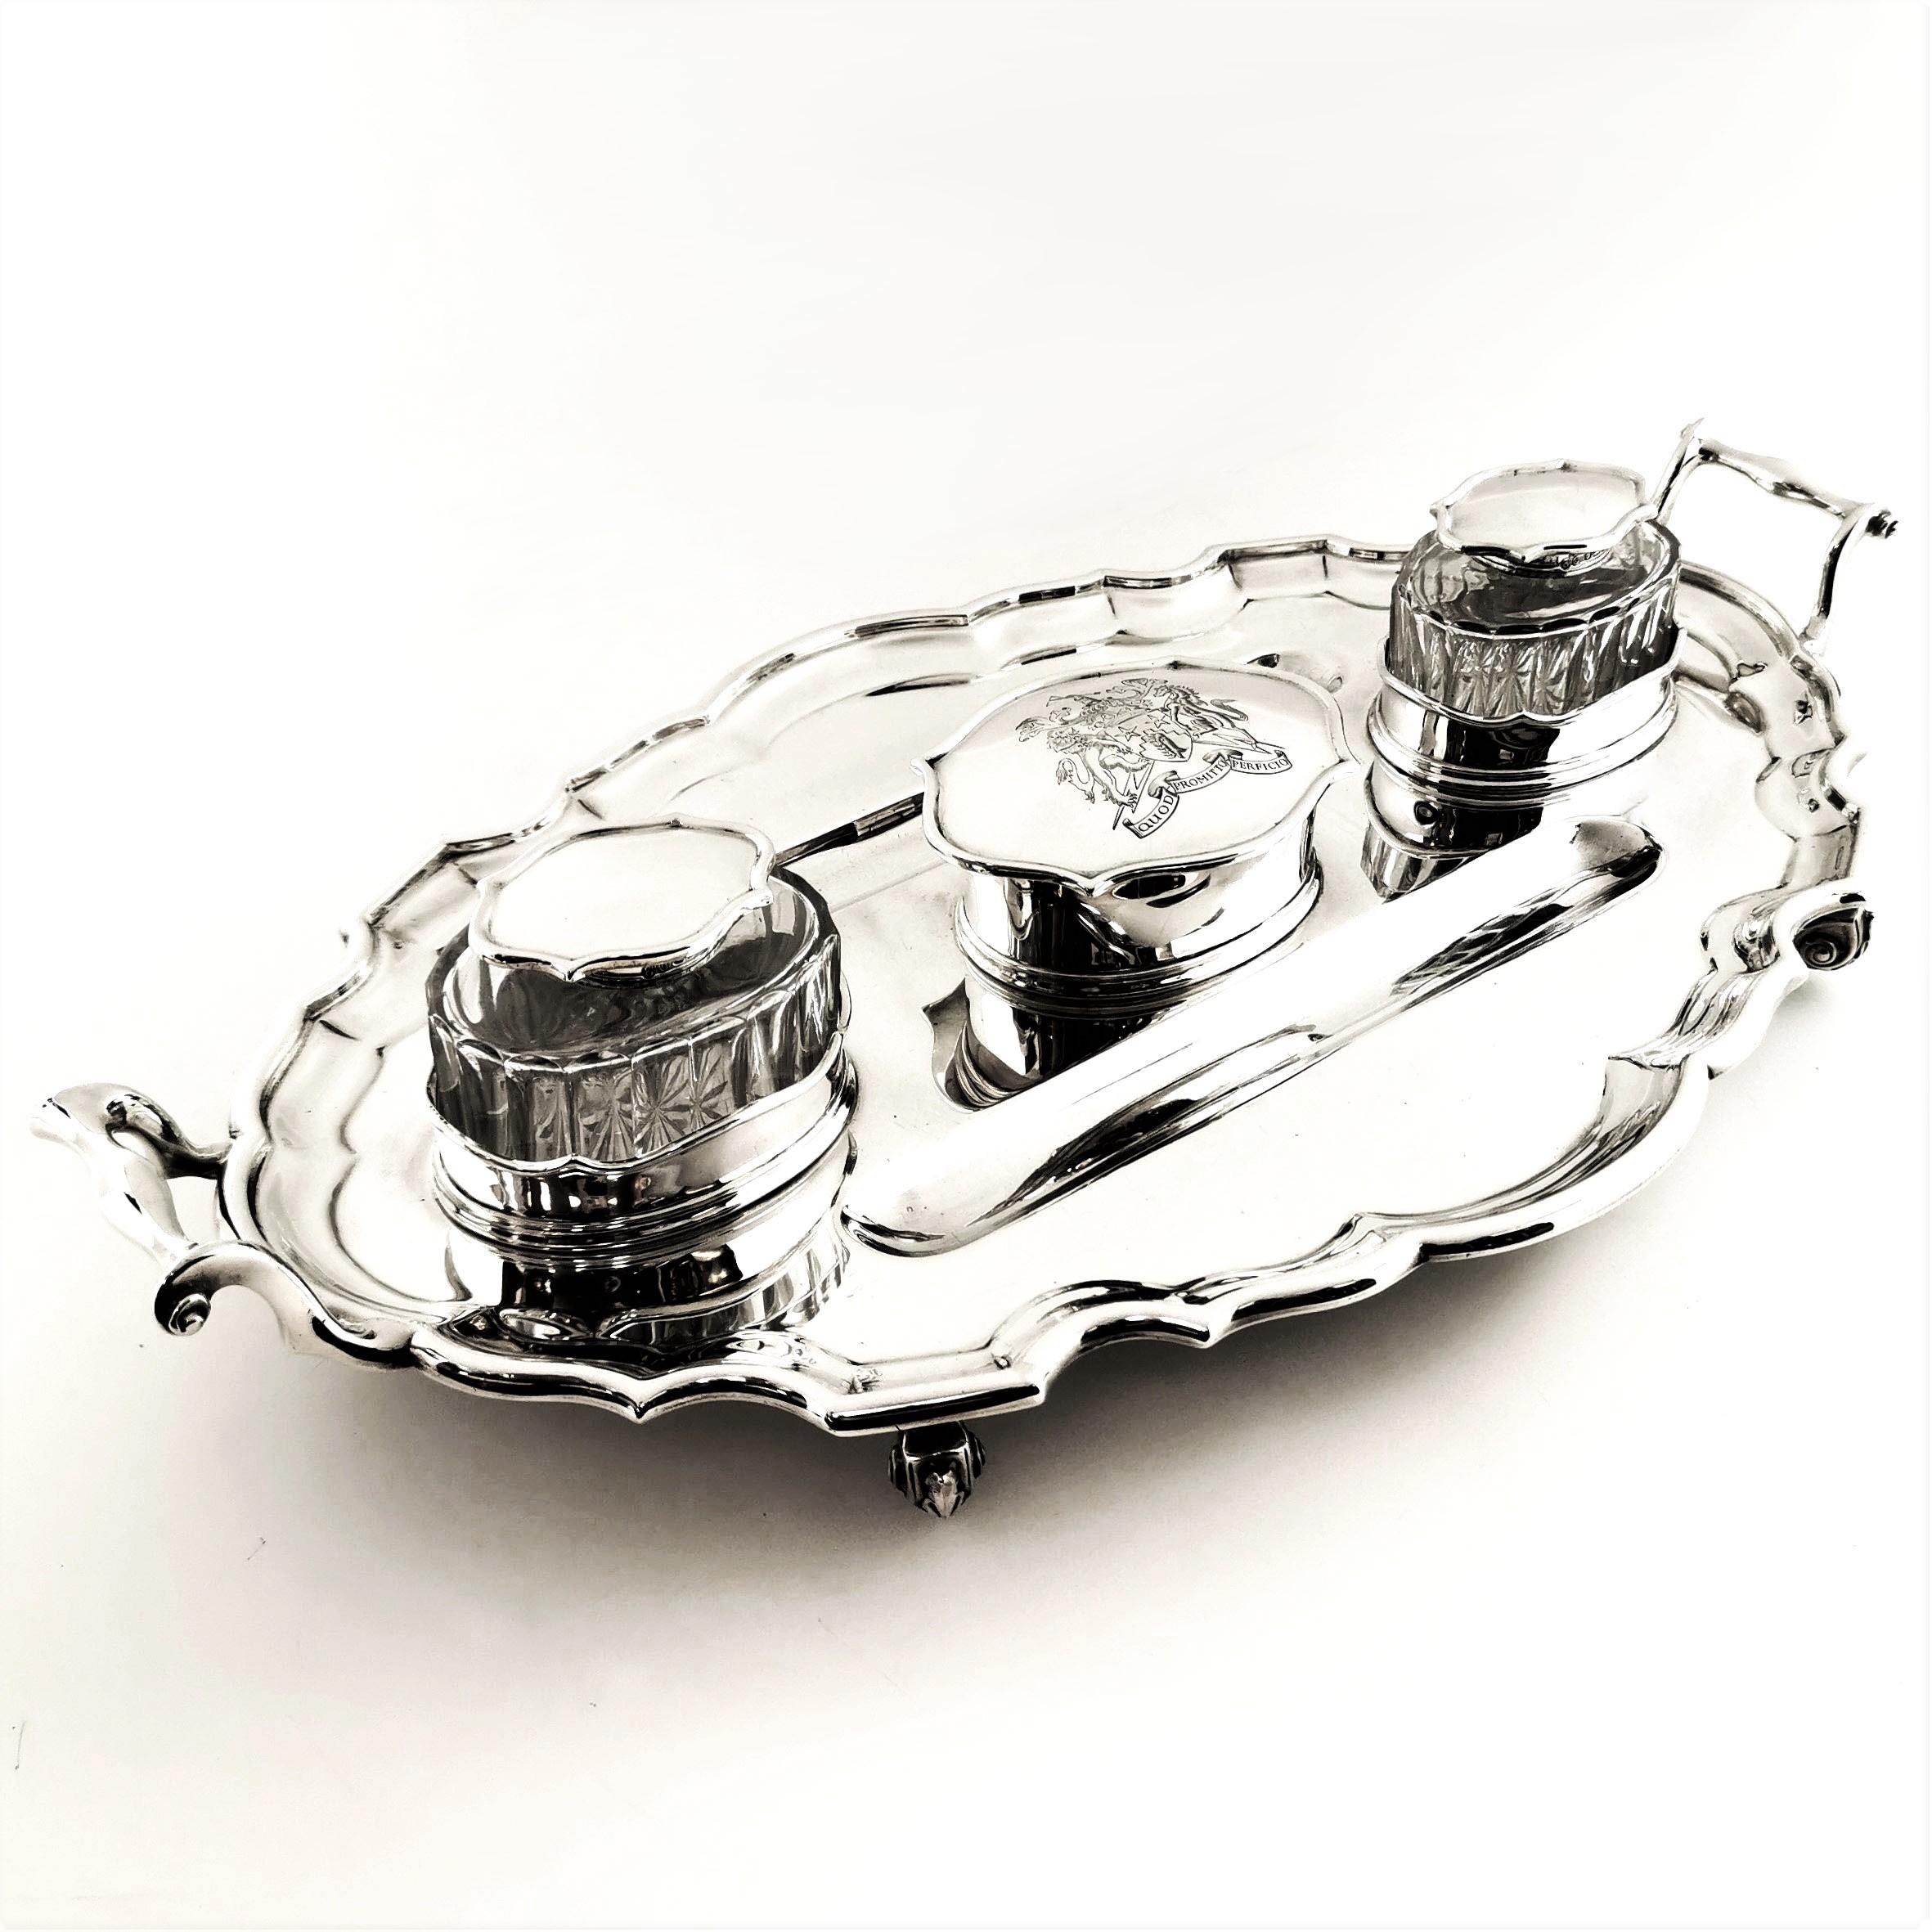 An impressive oval Antique solid Silver Inkstand standing on four scroll feet with a shaped rim and two scroll handles. The Inkstand has a pair of fitted Glass Inkwells with Solid Silver collars and hinged lids. There is a central lidded container